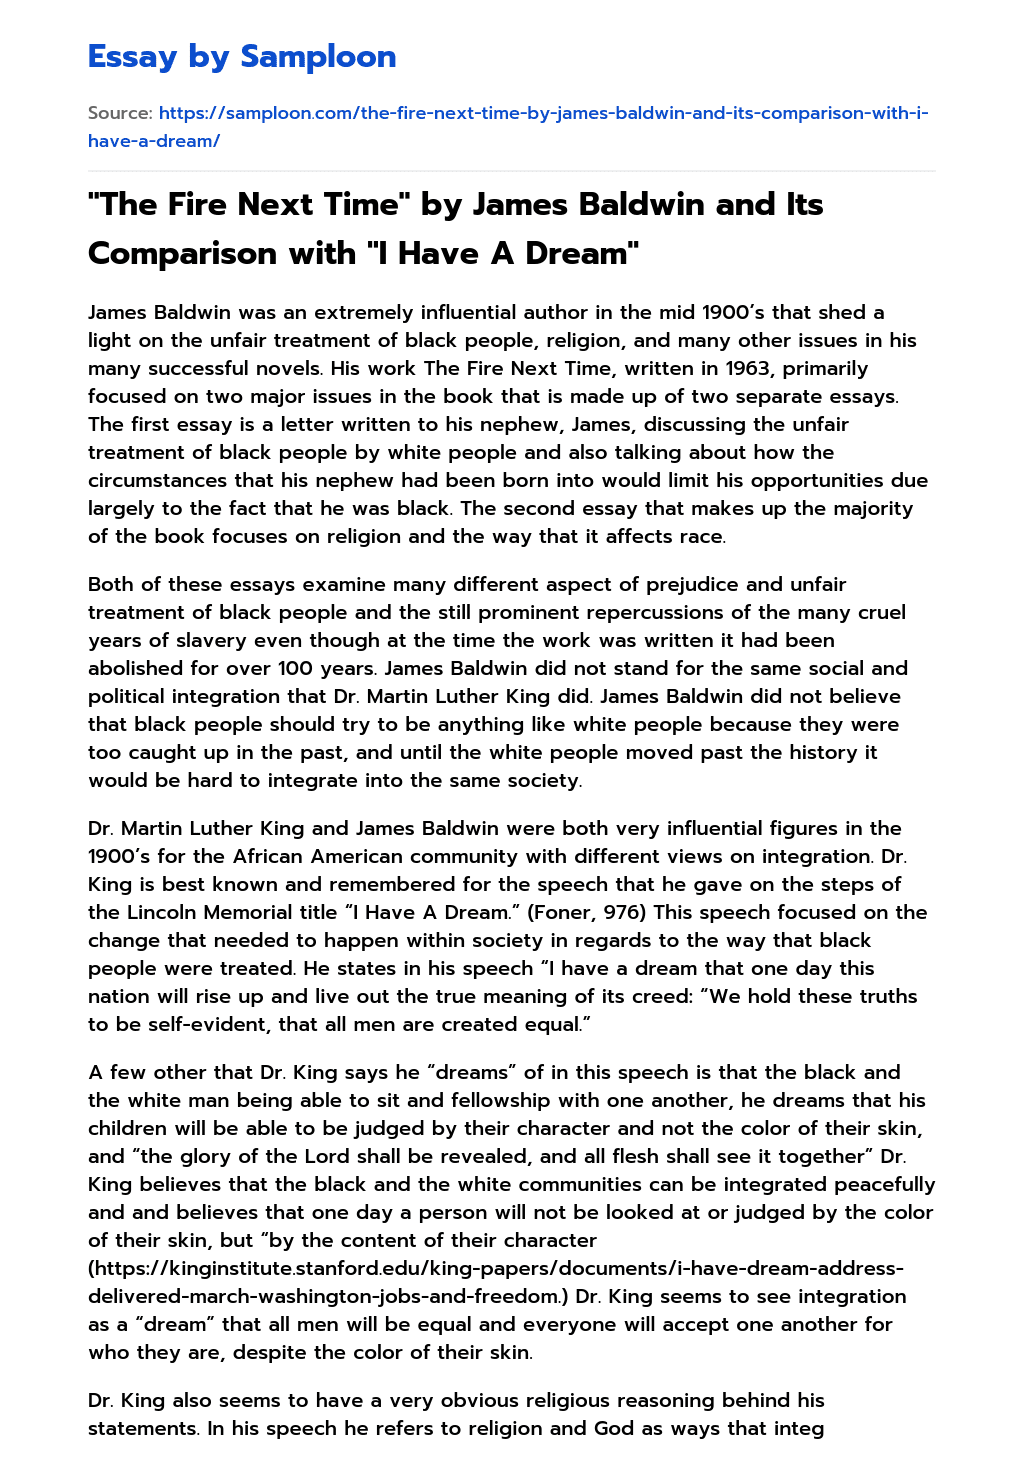 “The Fire Next Time” by James Baldwin and Its Comparison with “I Have A Dream” essay